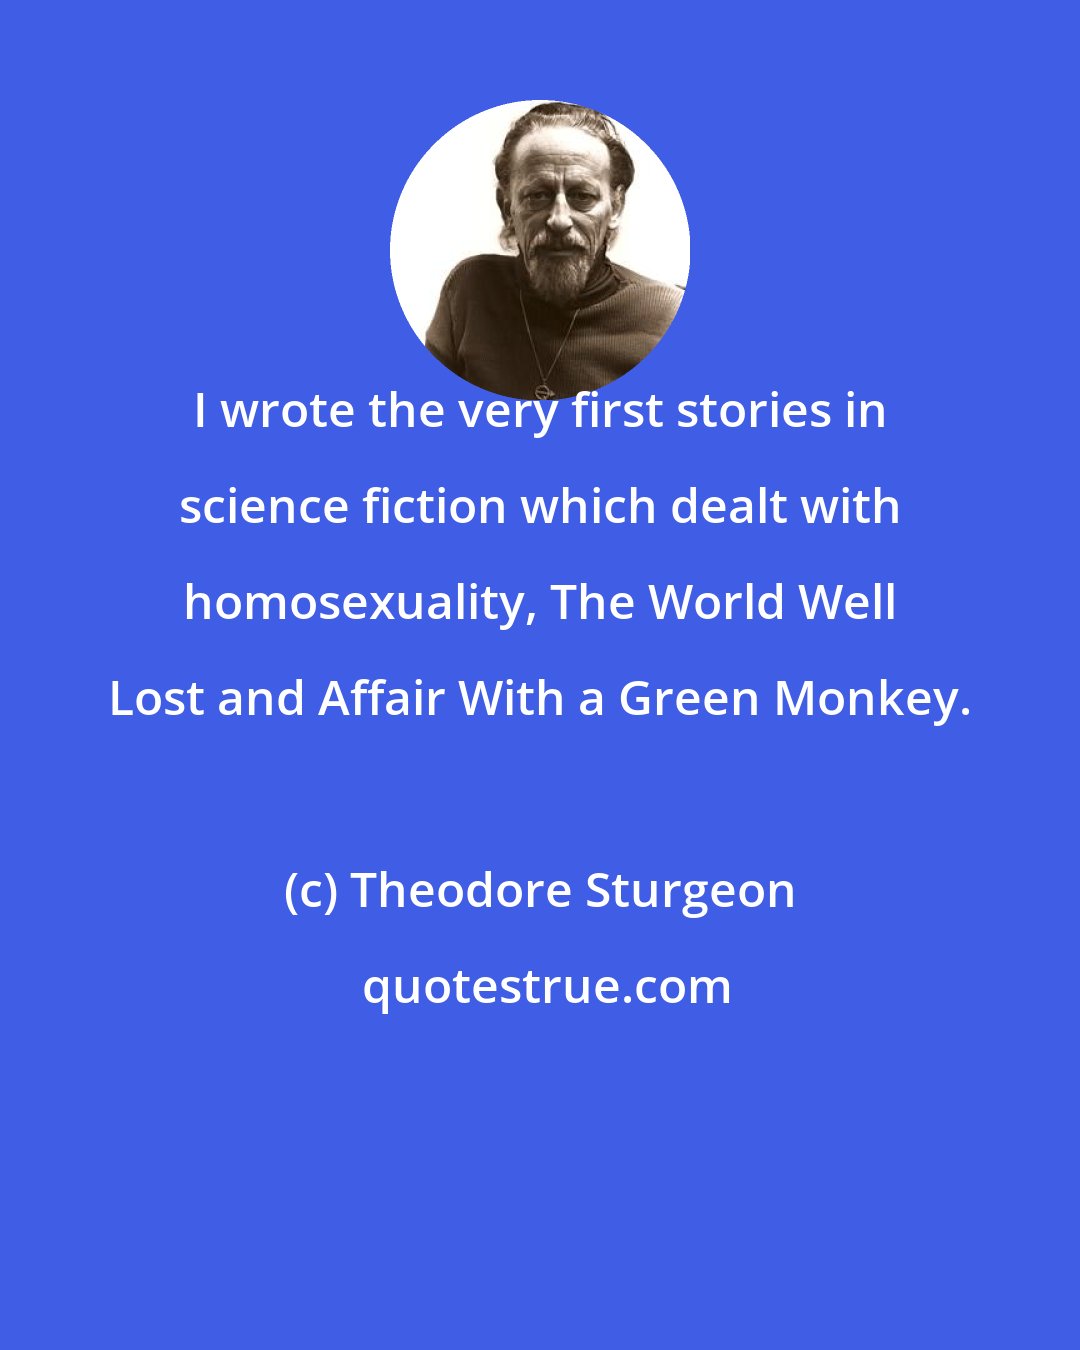 Theodore Sturgeon: I wrote the very first stories in science fiction which dealt with homosexuality, The World Well Lost and Affair With a Green Monkey.